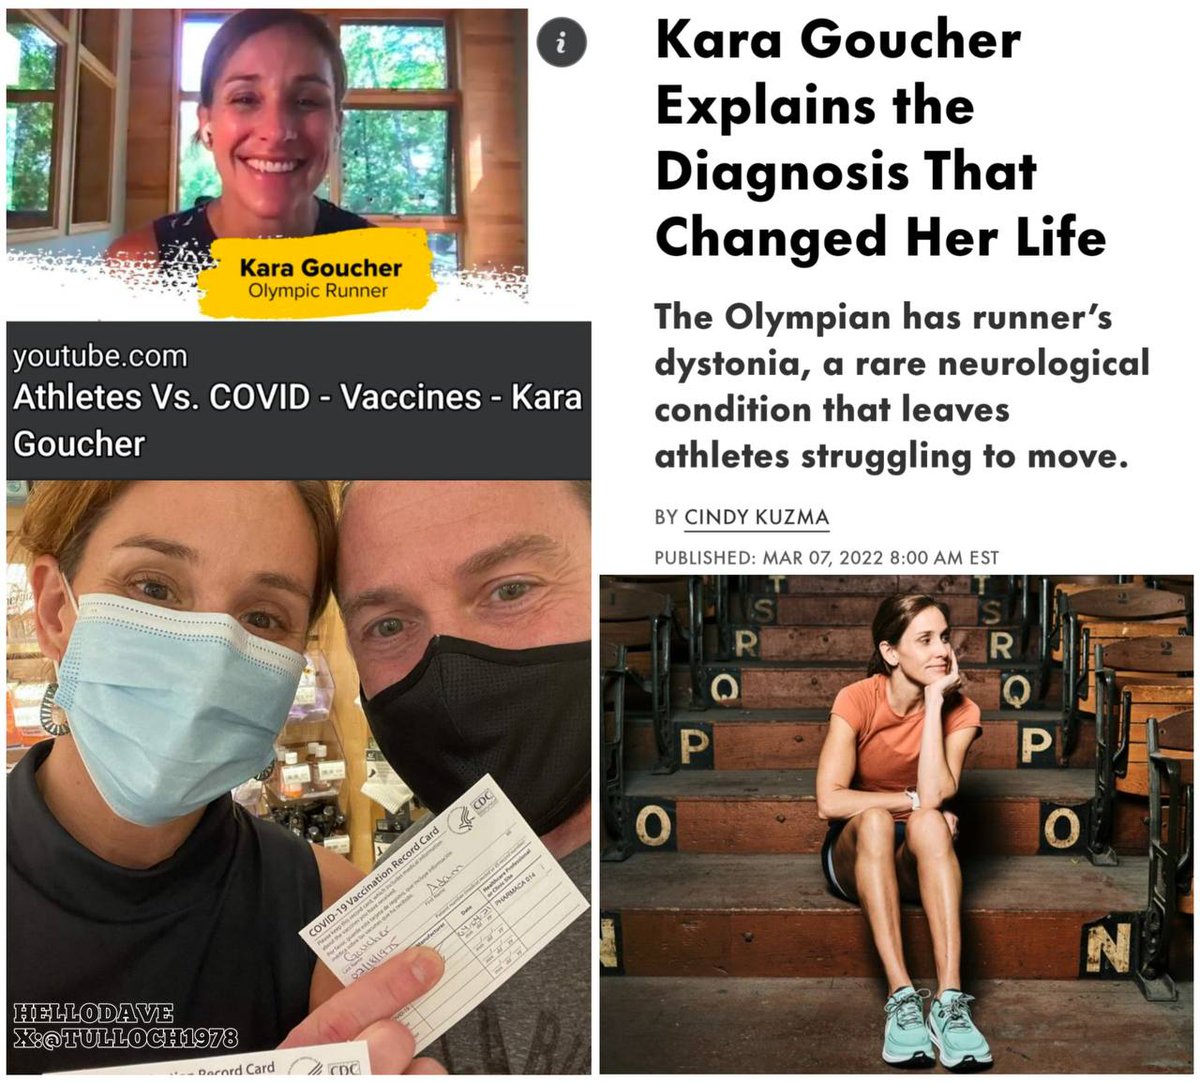 Runner, Kara Goucher Explains The Diagnosis That Changed Her Life 💉(March 2024)
#VaccineSideEffects 

'I am vaccinated with Pfizer.”

“The Olympian has runner’s dystonia, a rare neurological condition that leaves athletes struggling to move.”

join colinrivas.tv